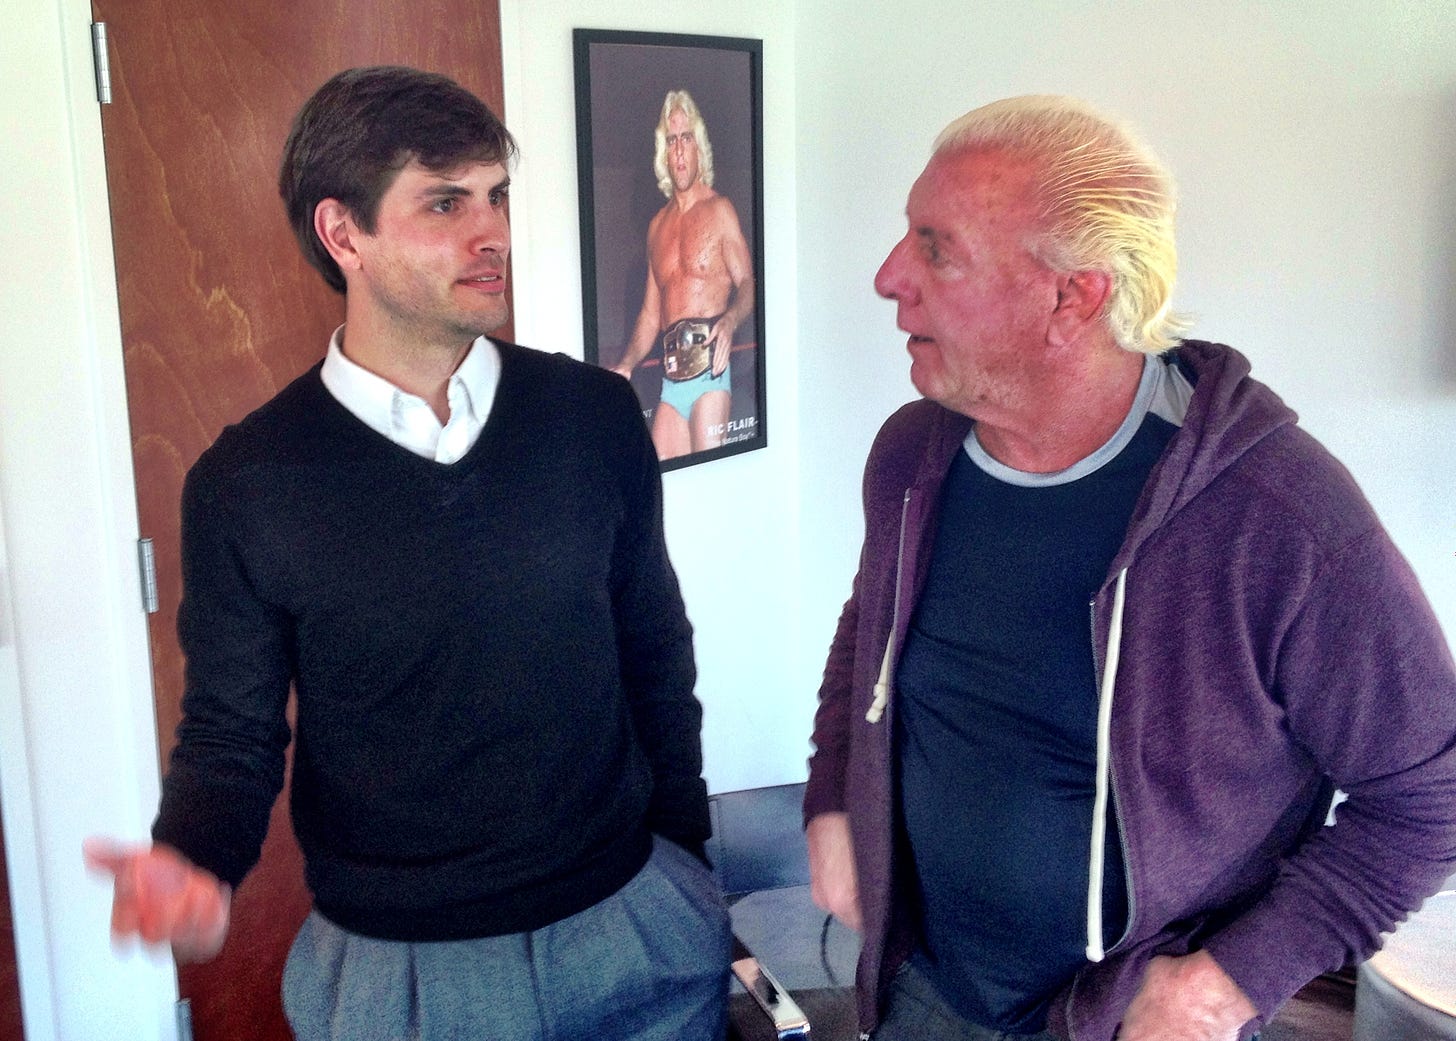 Jeremy and Ric Flair in 2013